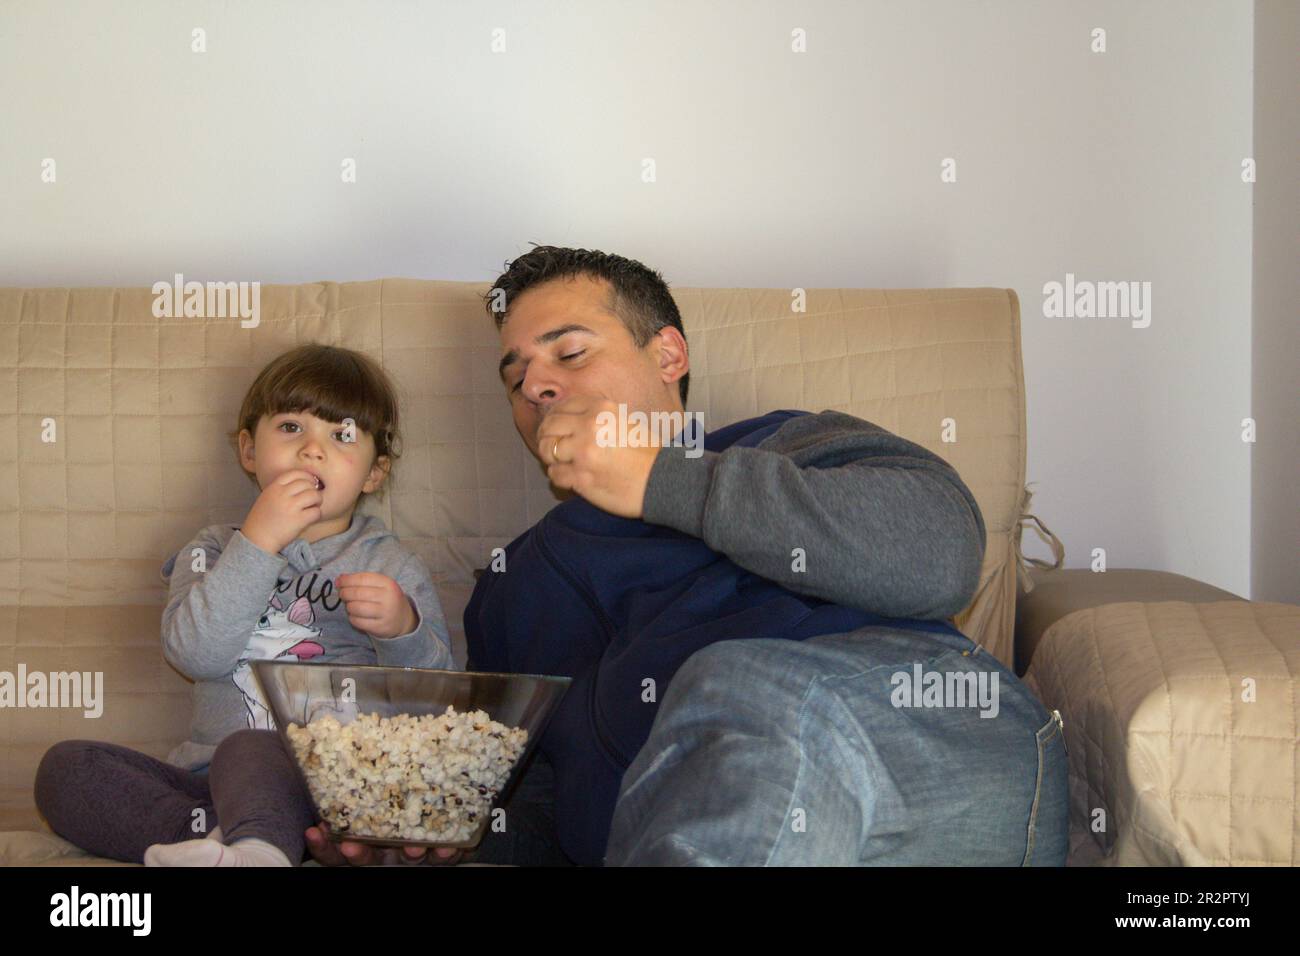 Image of a dad with his daughter lying on the sofa at home while watching TV and eating popcorn. Stock Photo